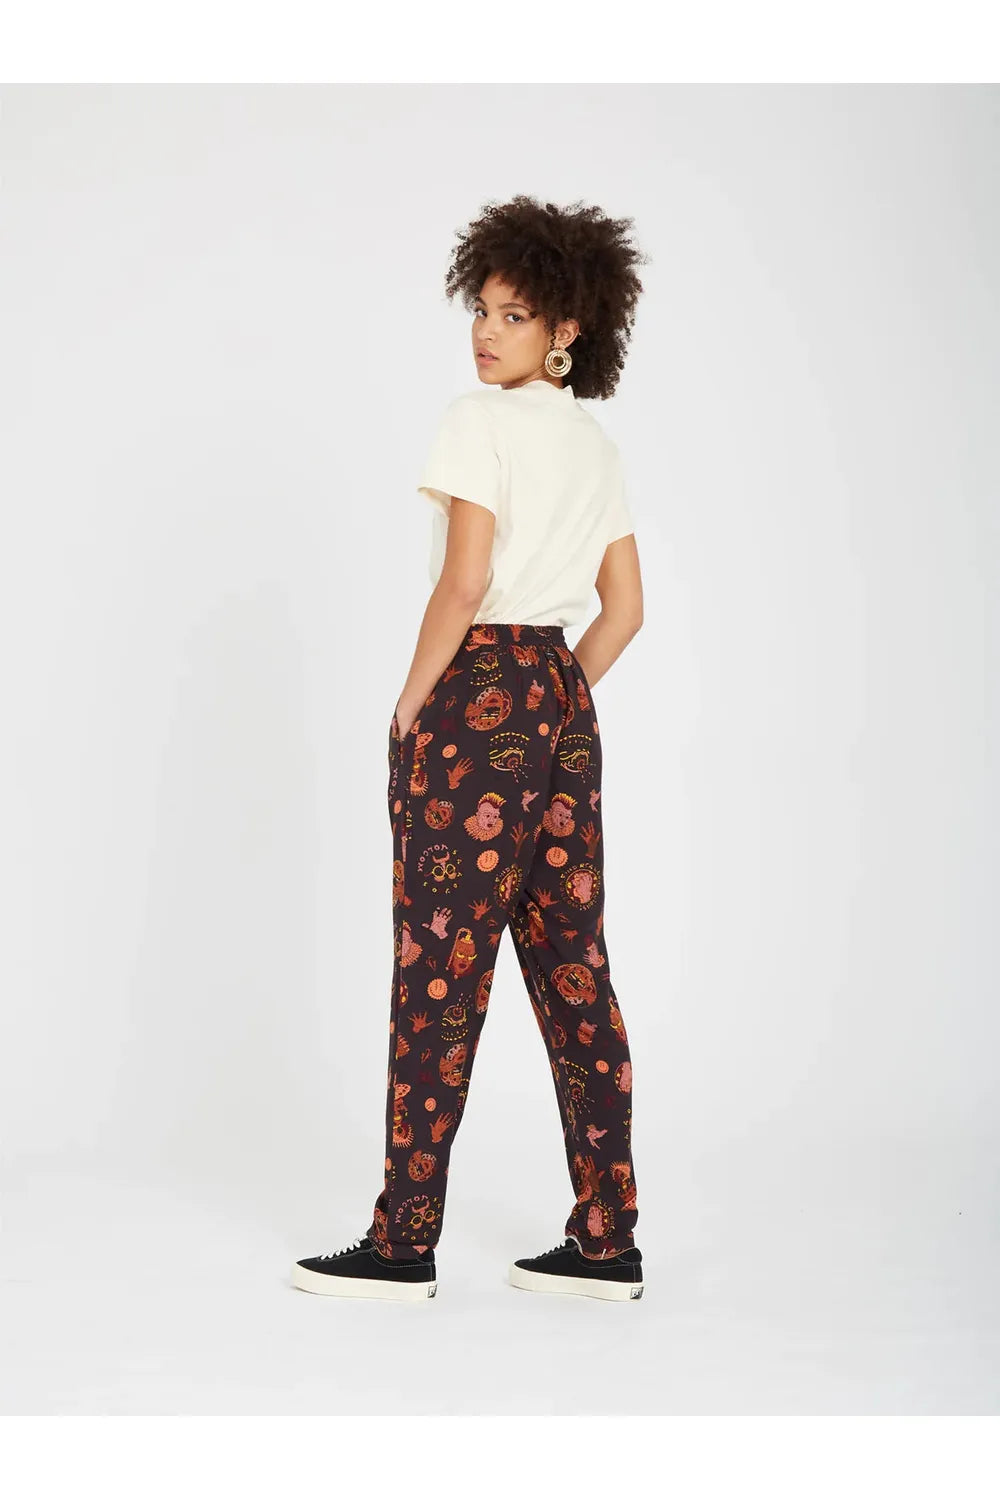 Volcom Connected Minds Surf Pant